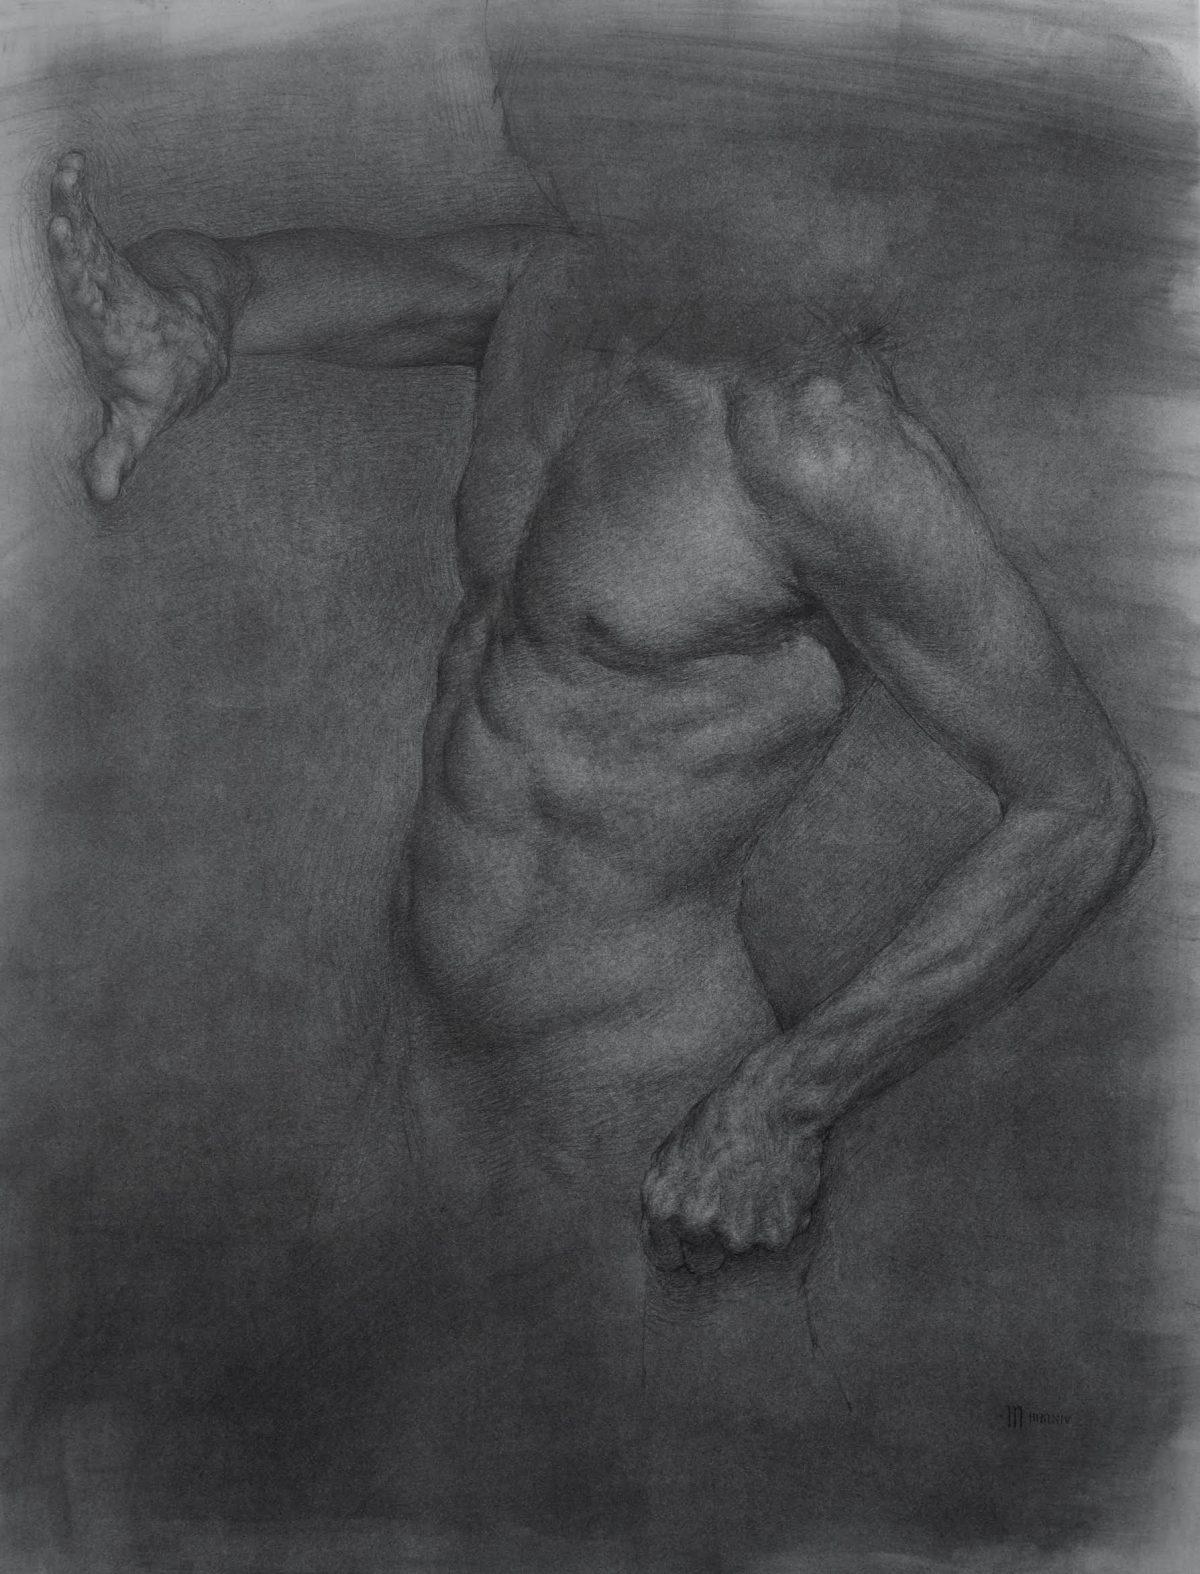  "Push and Pull" by M. Tobias Hall. Graphite and charcoal on paper, 13 inches by 13 inches. (The Florence Academy of Art–U.S.)